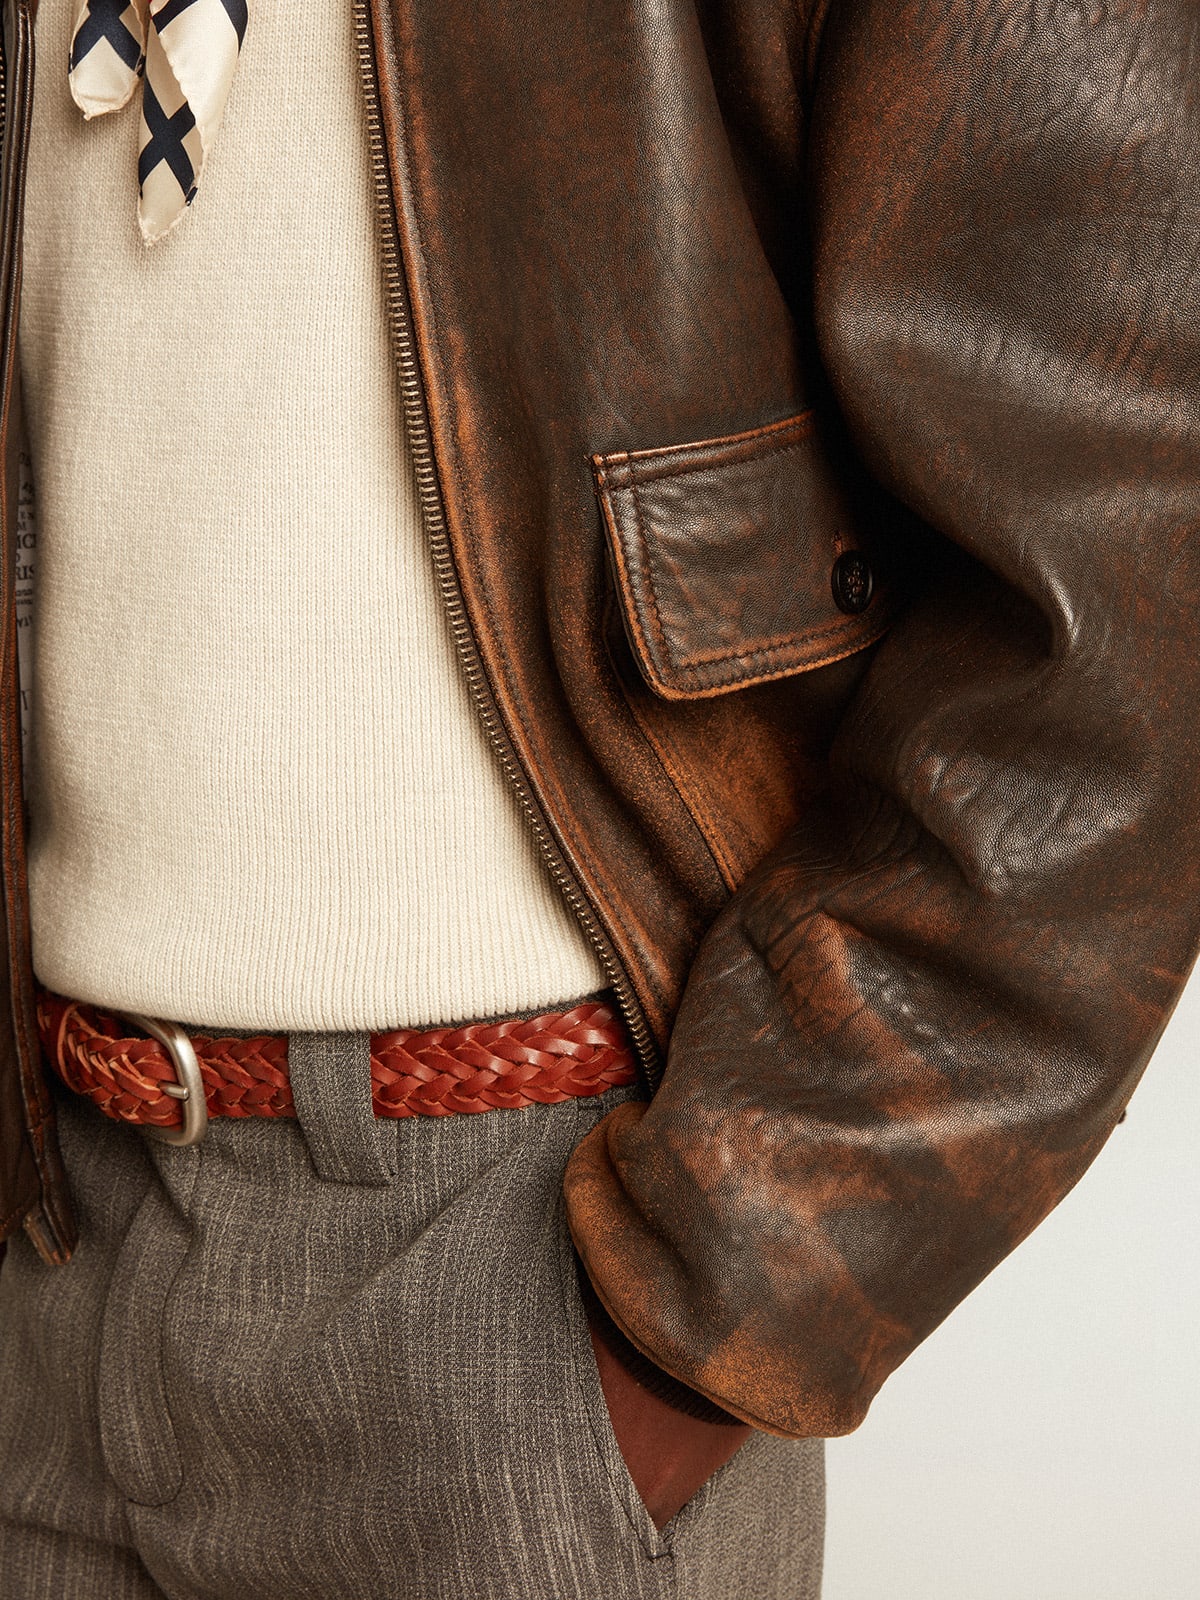 Golden Goose - Aviator-style jacket in brown leather in 